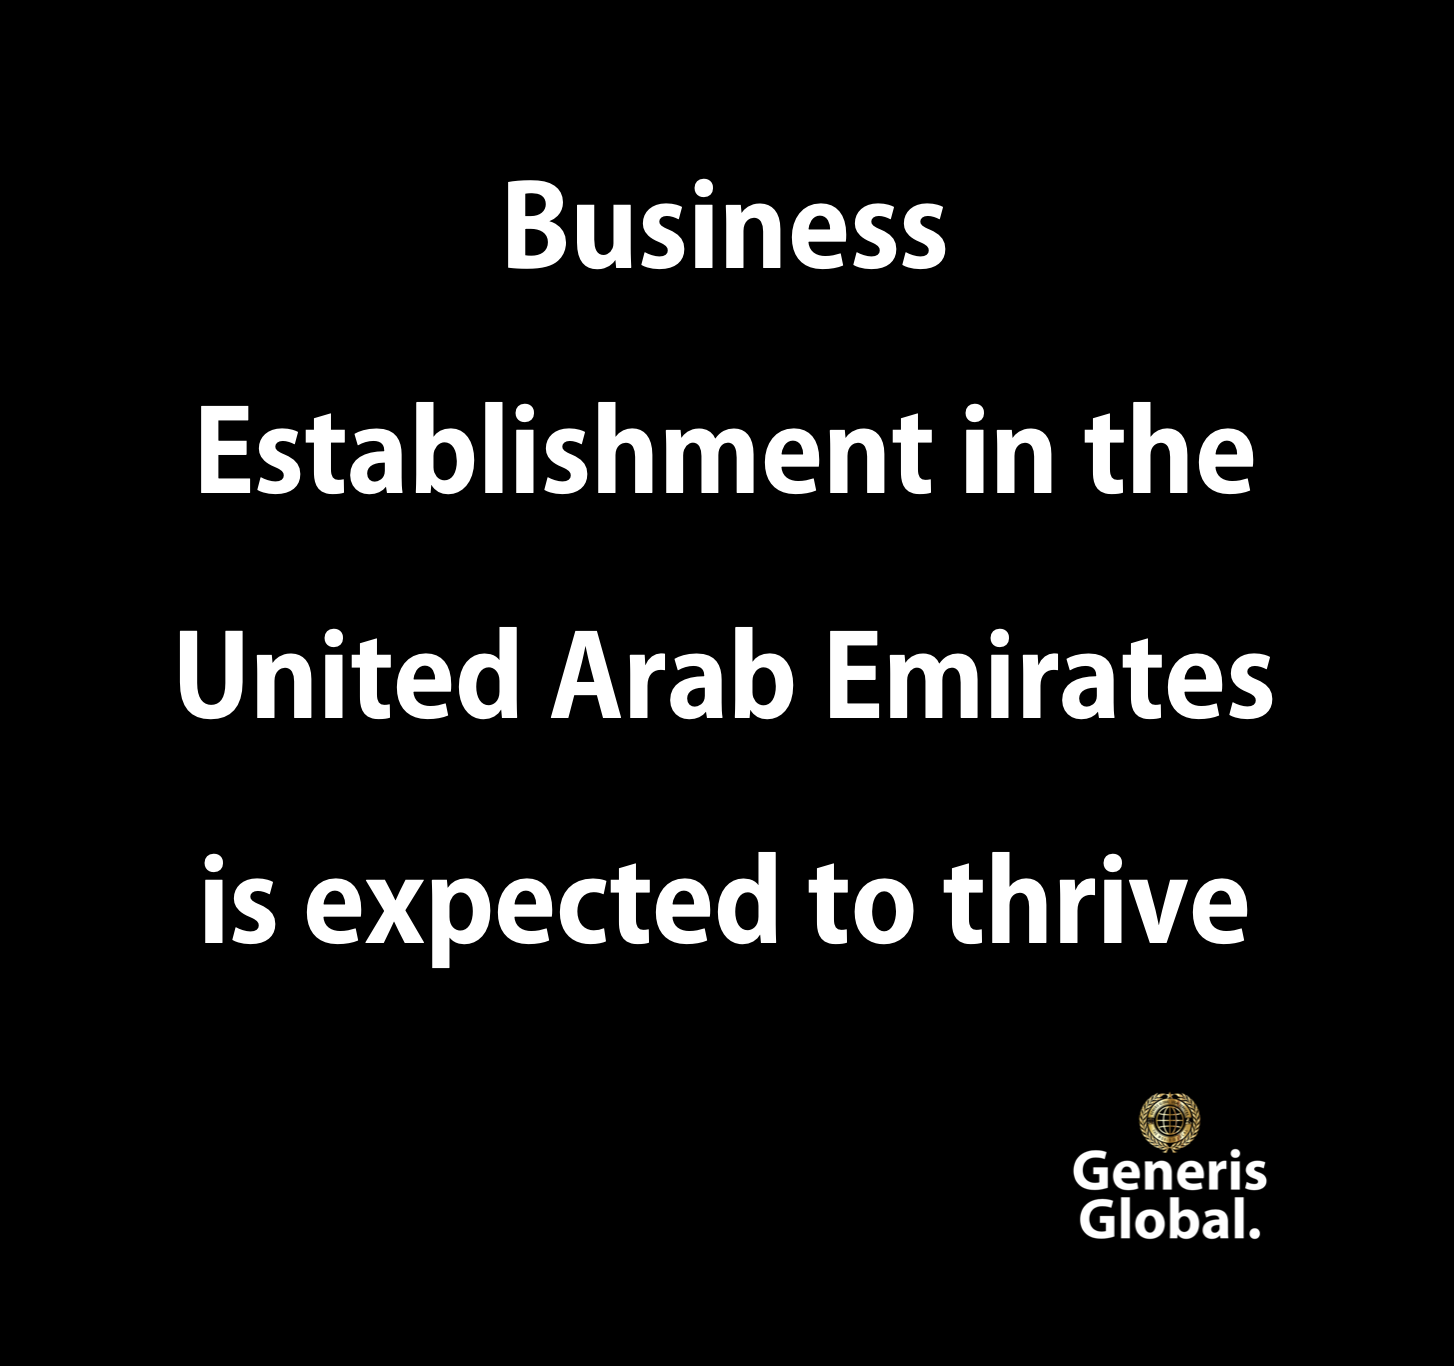 Business Establishment in the United Arab Emirates is expected to thrive